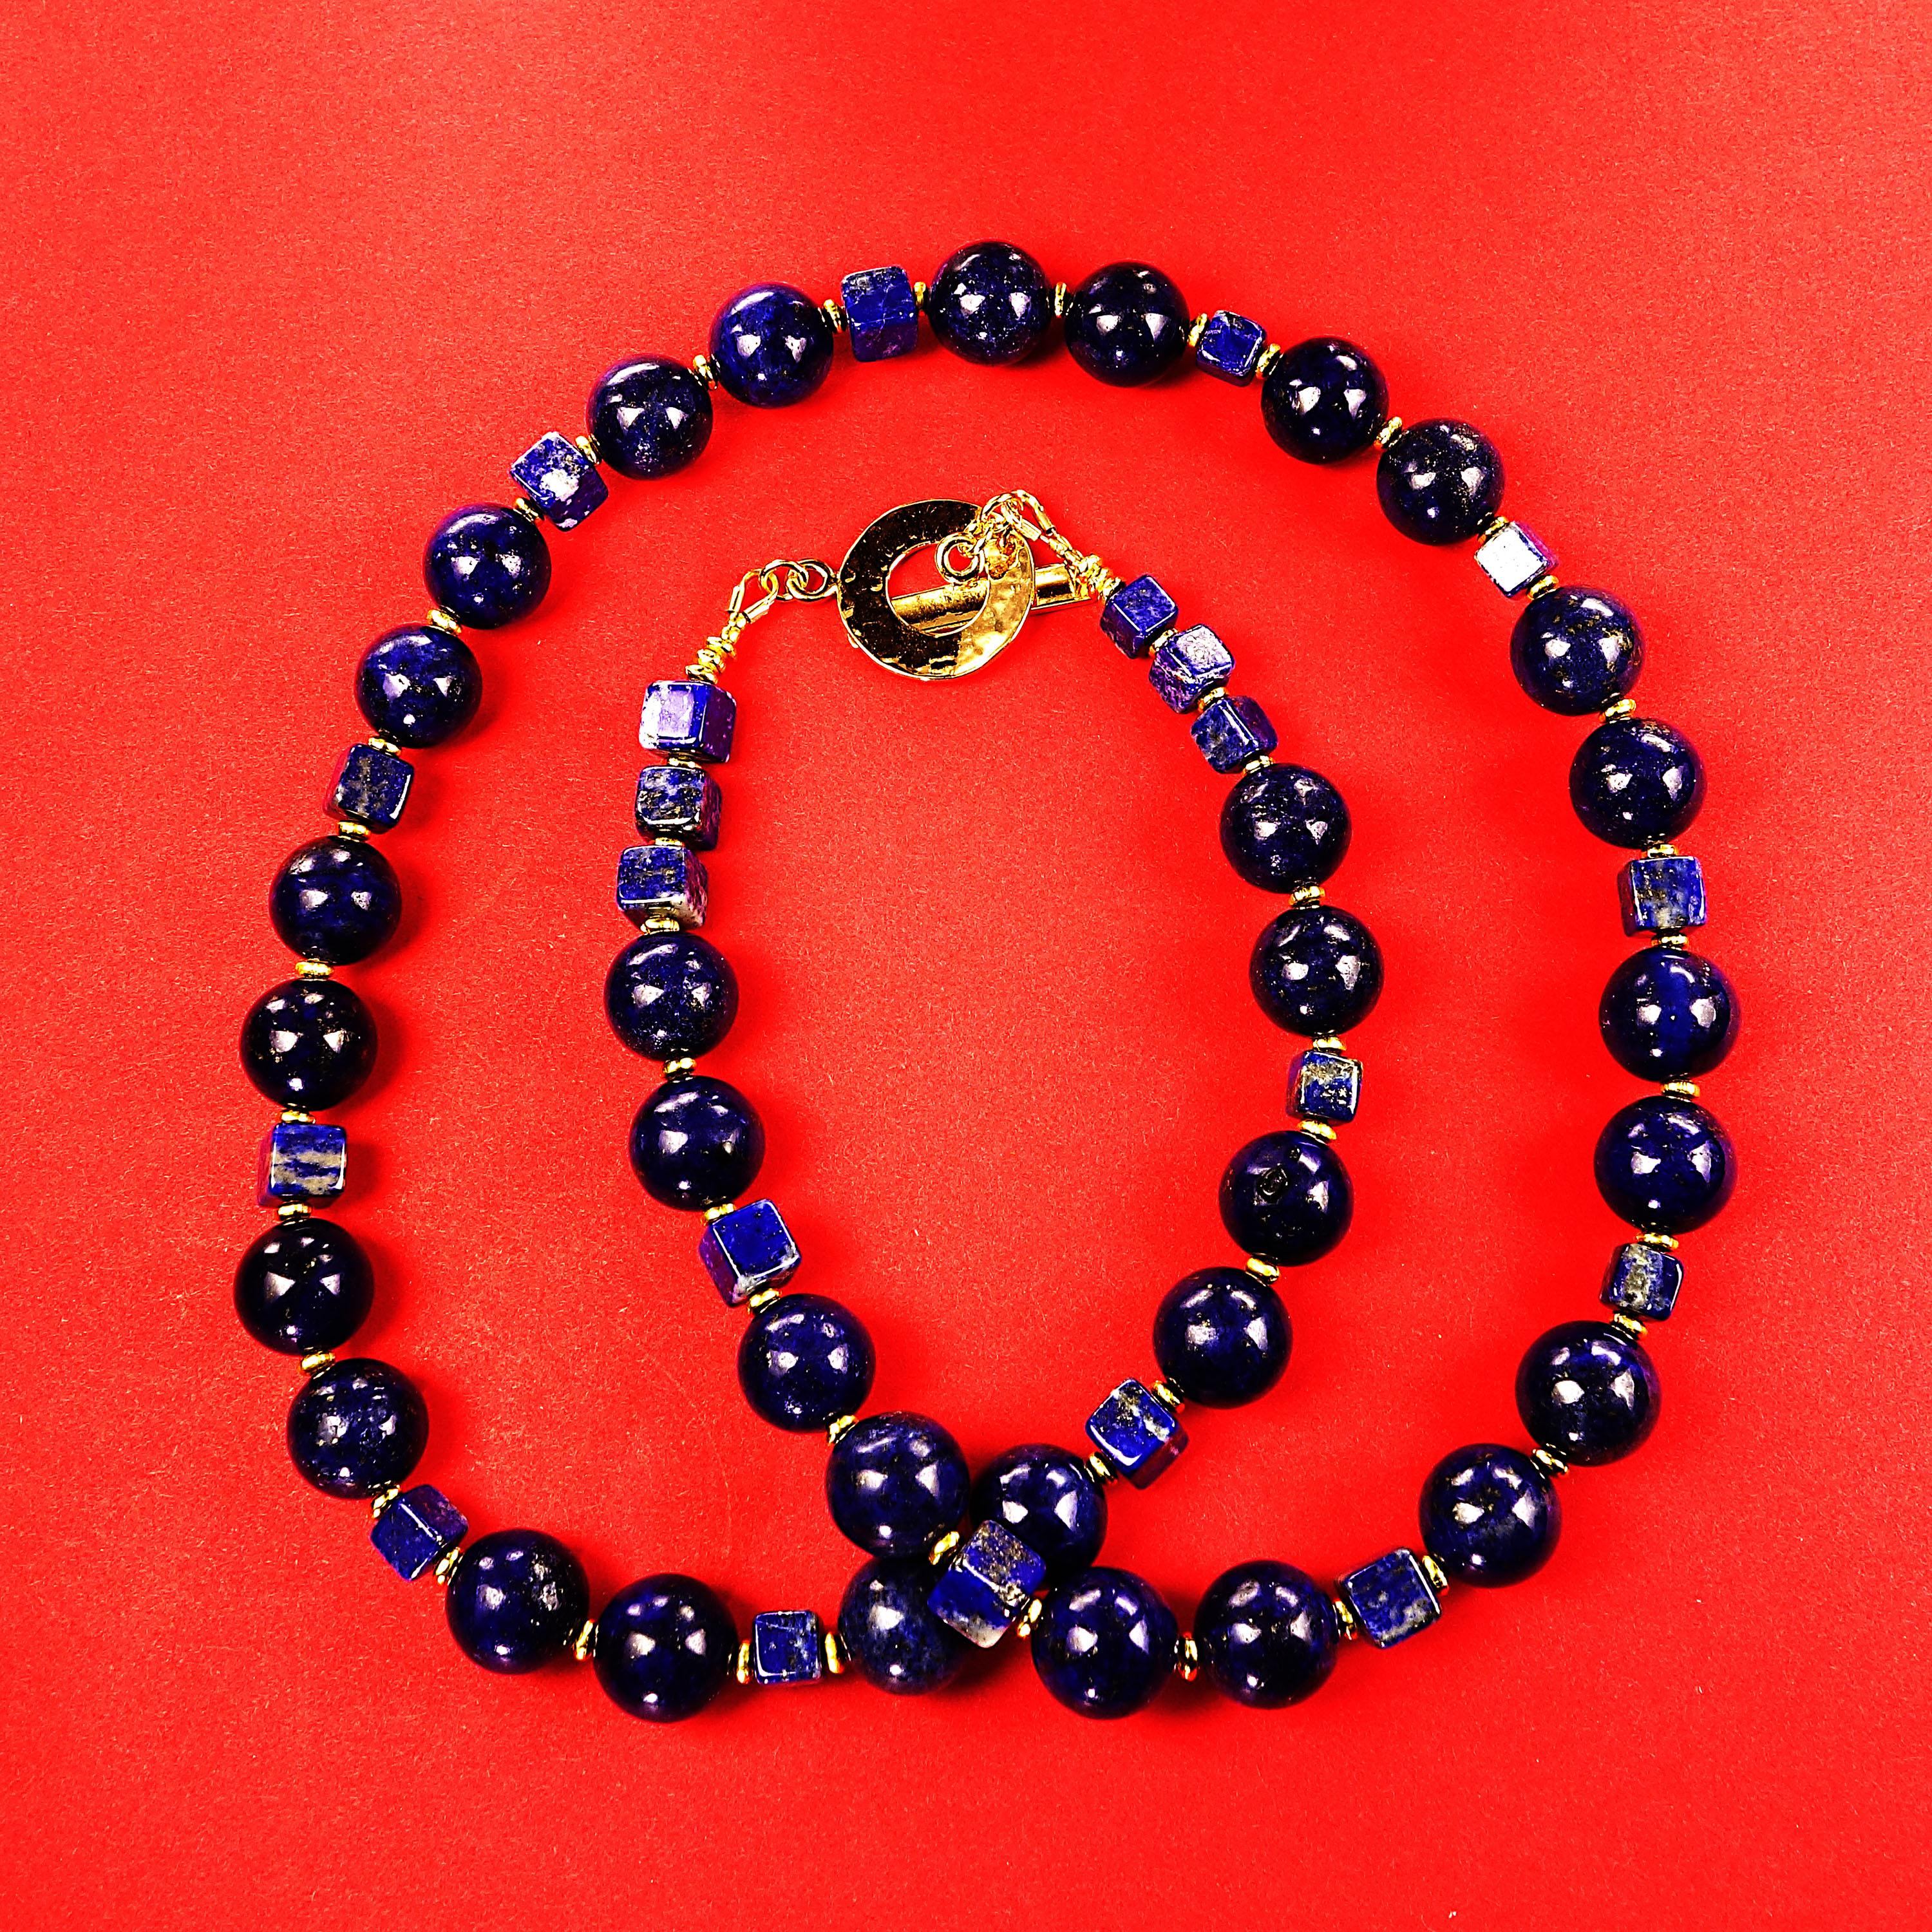 Handmade, blue Lapis Lazuli necklace in the popular 22 inch length. This, so easily wearable blue Lapis Lazuli necklace will enhance all you choose to combine with it. The clasp is a hammered gold vermeil toggle. This unique necklace features two